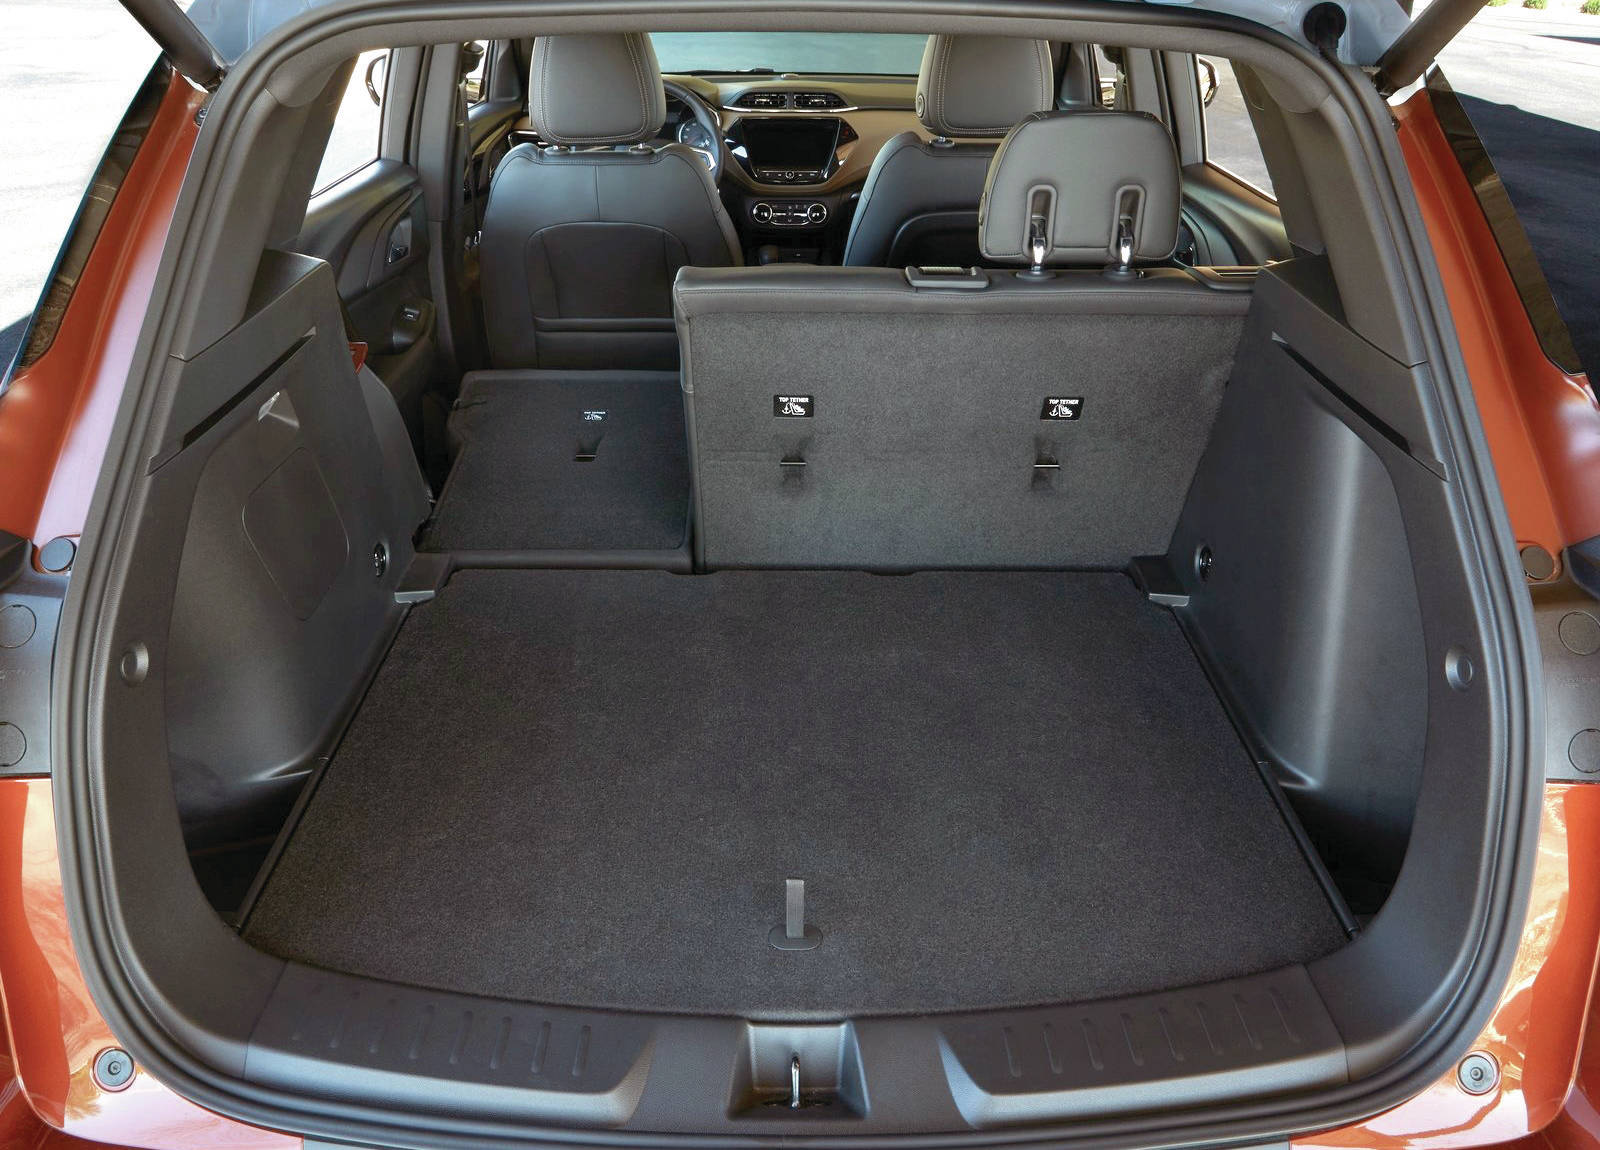 Although the Trailblazer is larger than the Trax, it does have more cargo room due to a taller ceiling. Note that the folding rear seat is not standard for base Trailblazer model. PHOTO: CHEVROLET